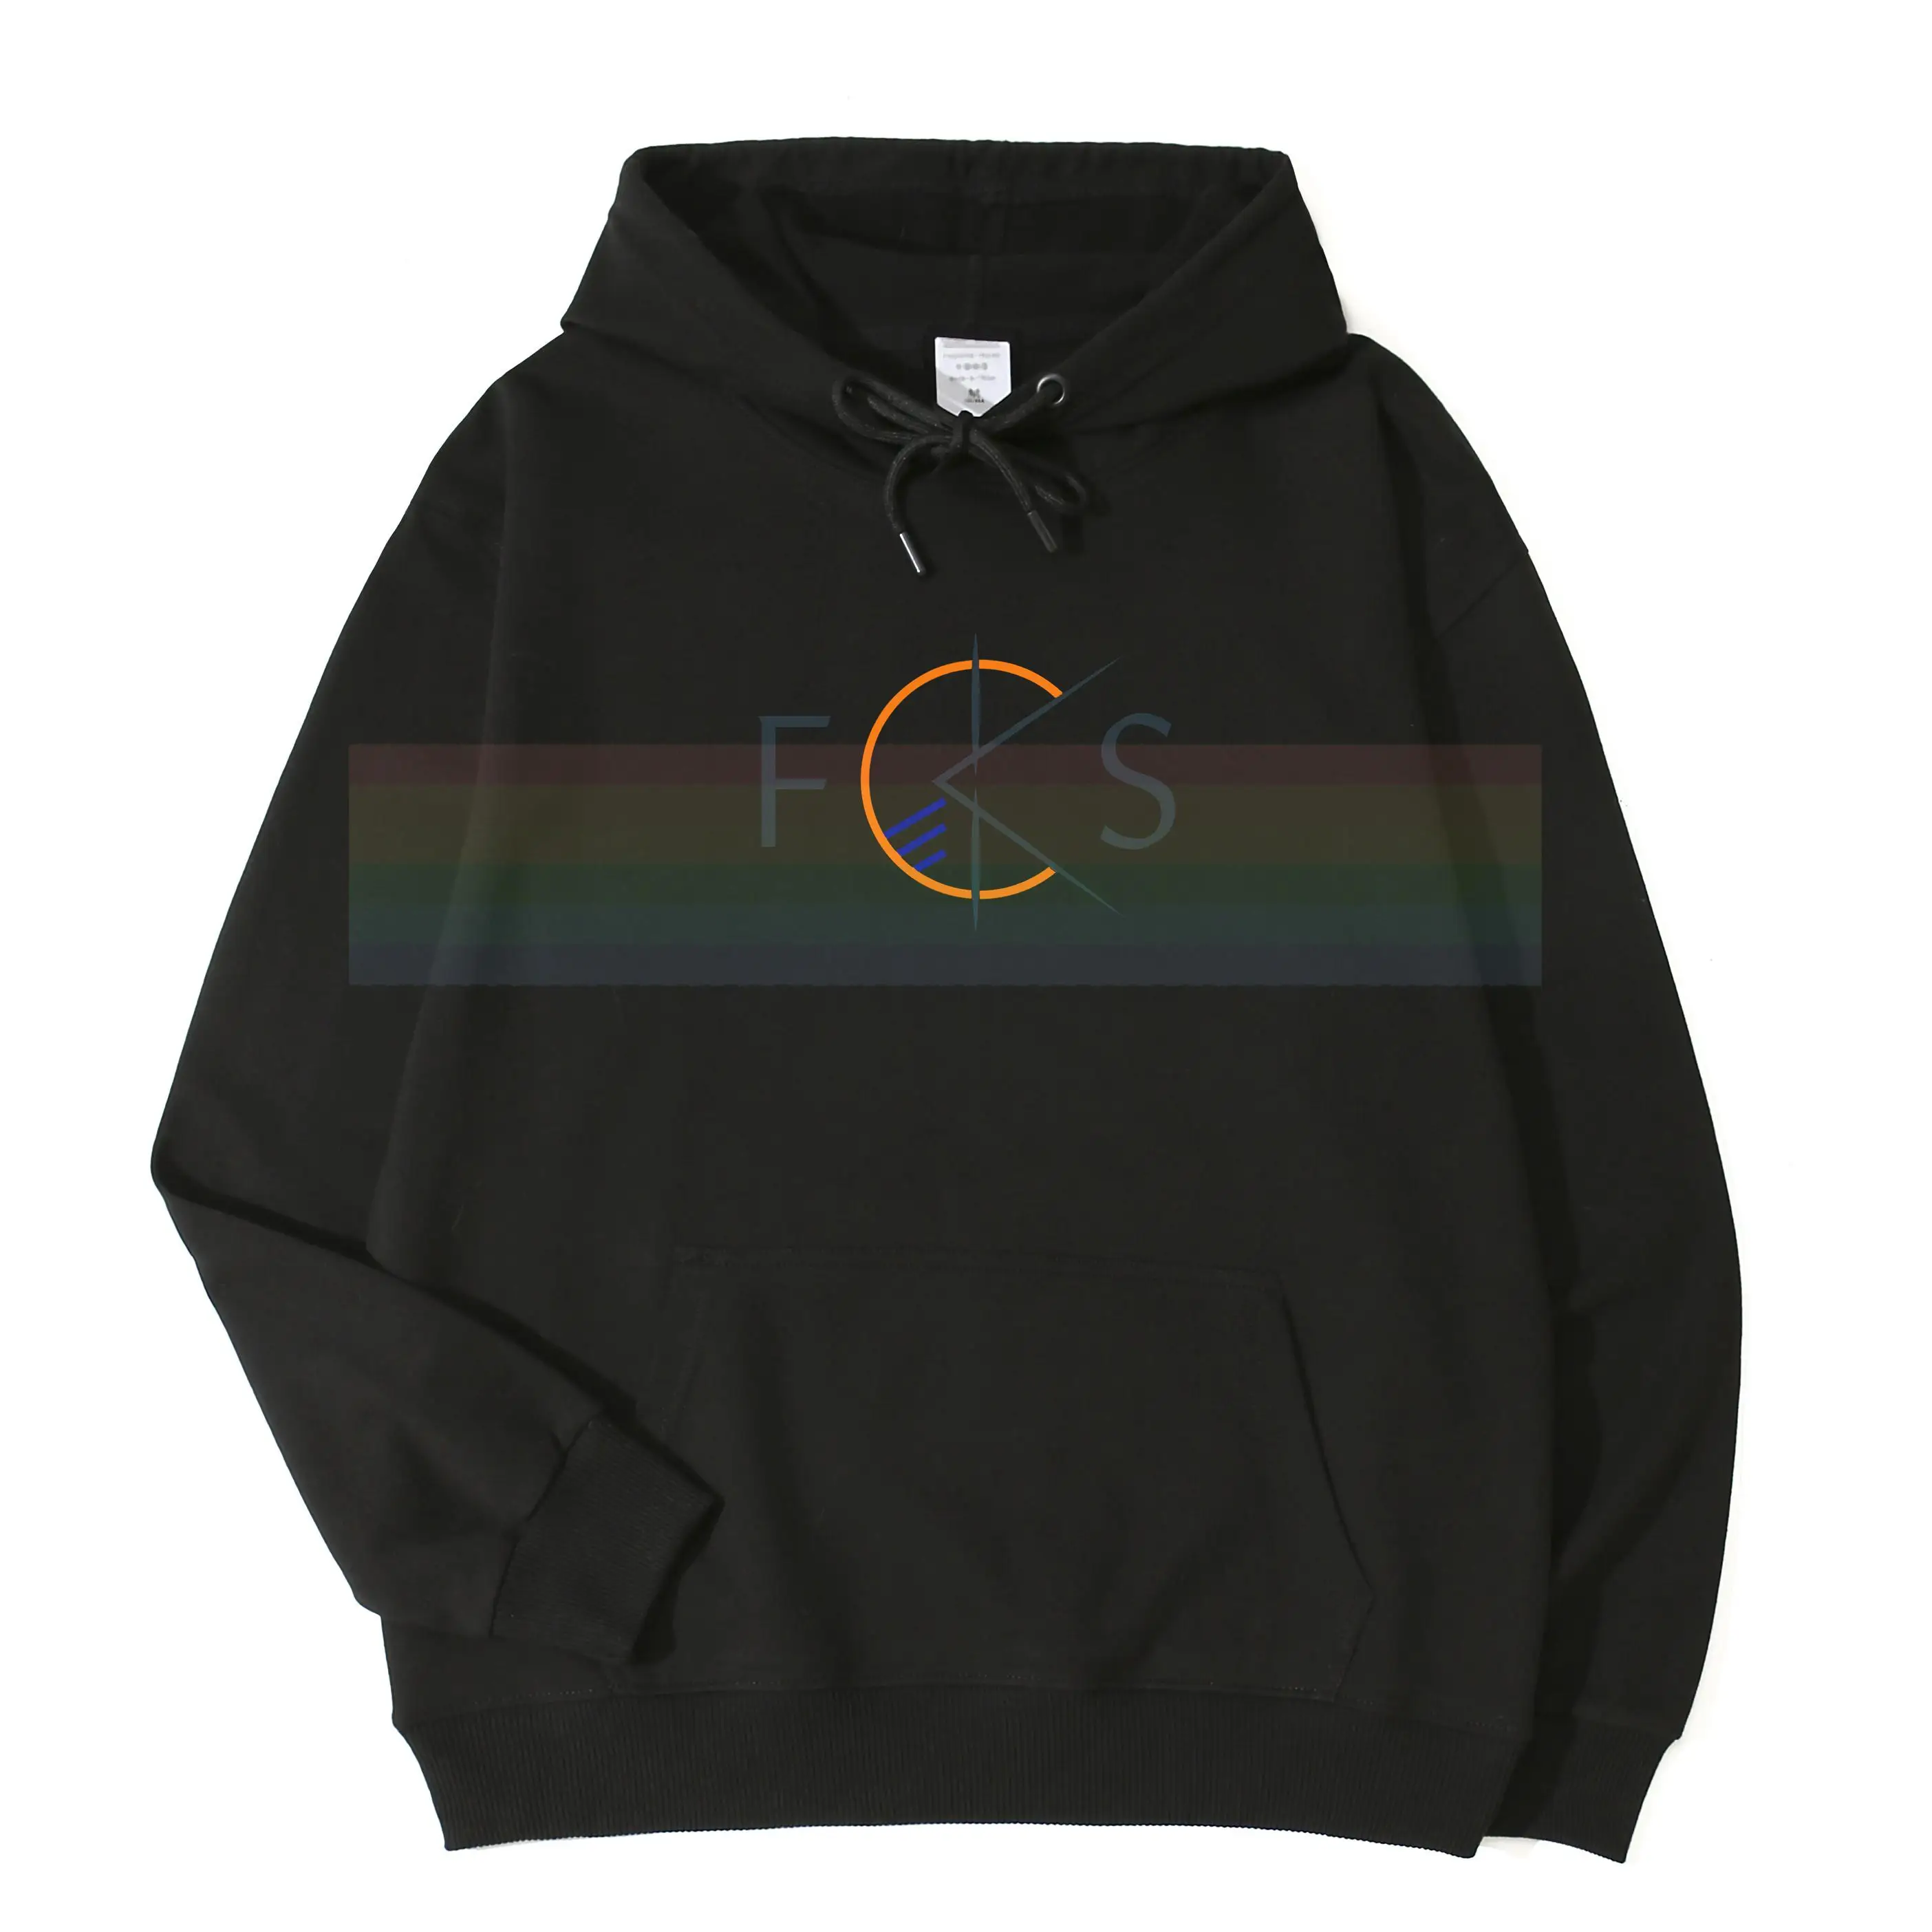 

Fin Control System FCS Men's Hoodies women Spring Autumn Paired Couples Casual Hoodies Sweatshirts surfing brand Hoodies TopsN01